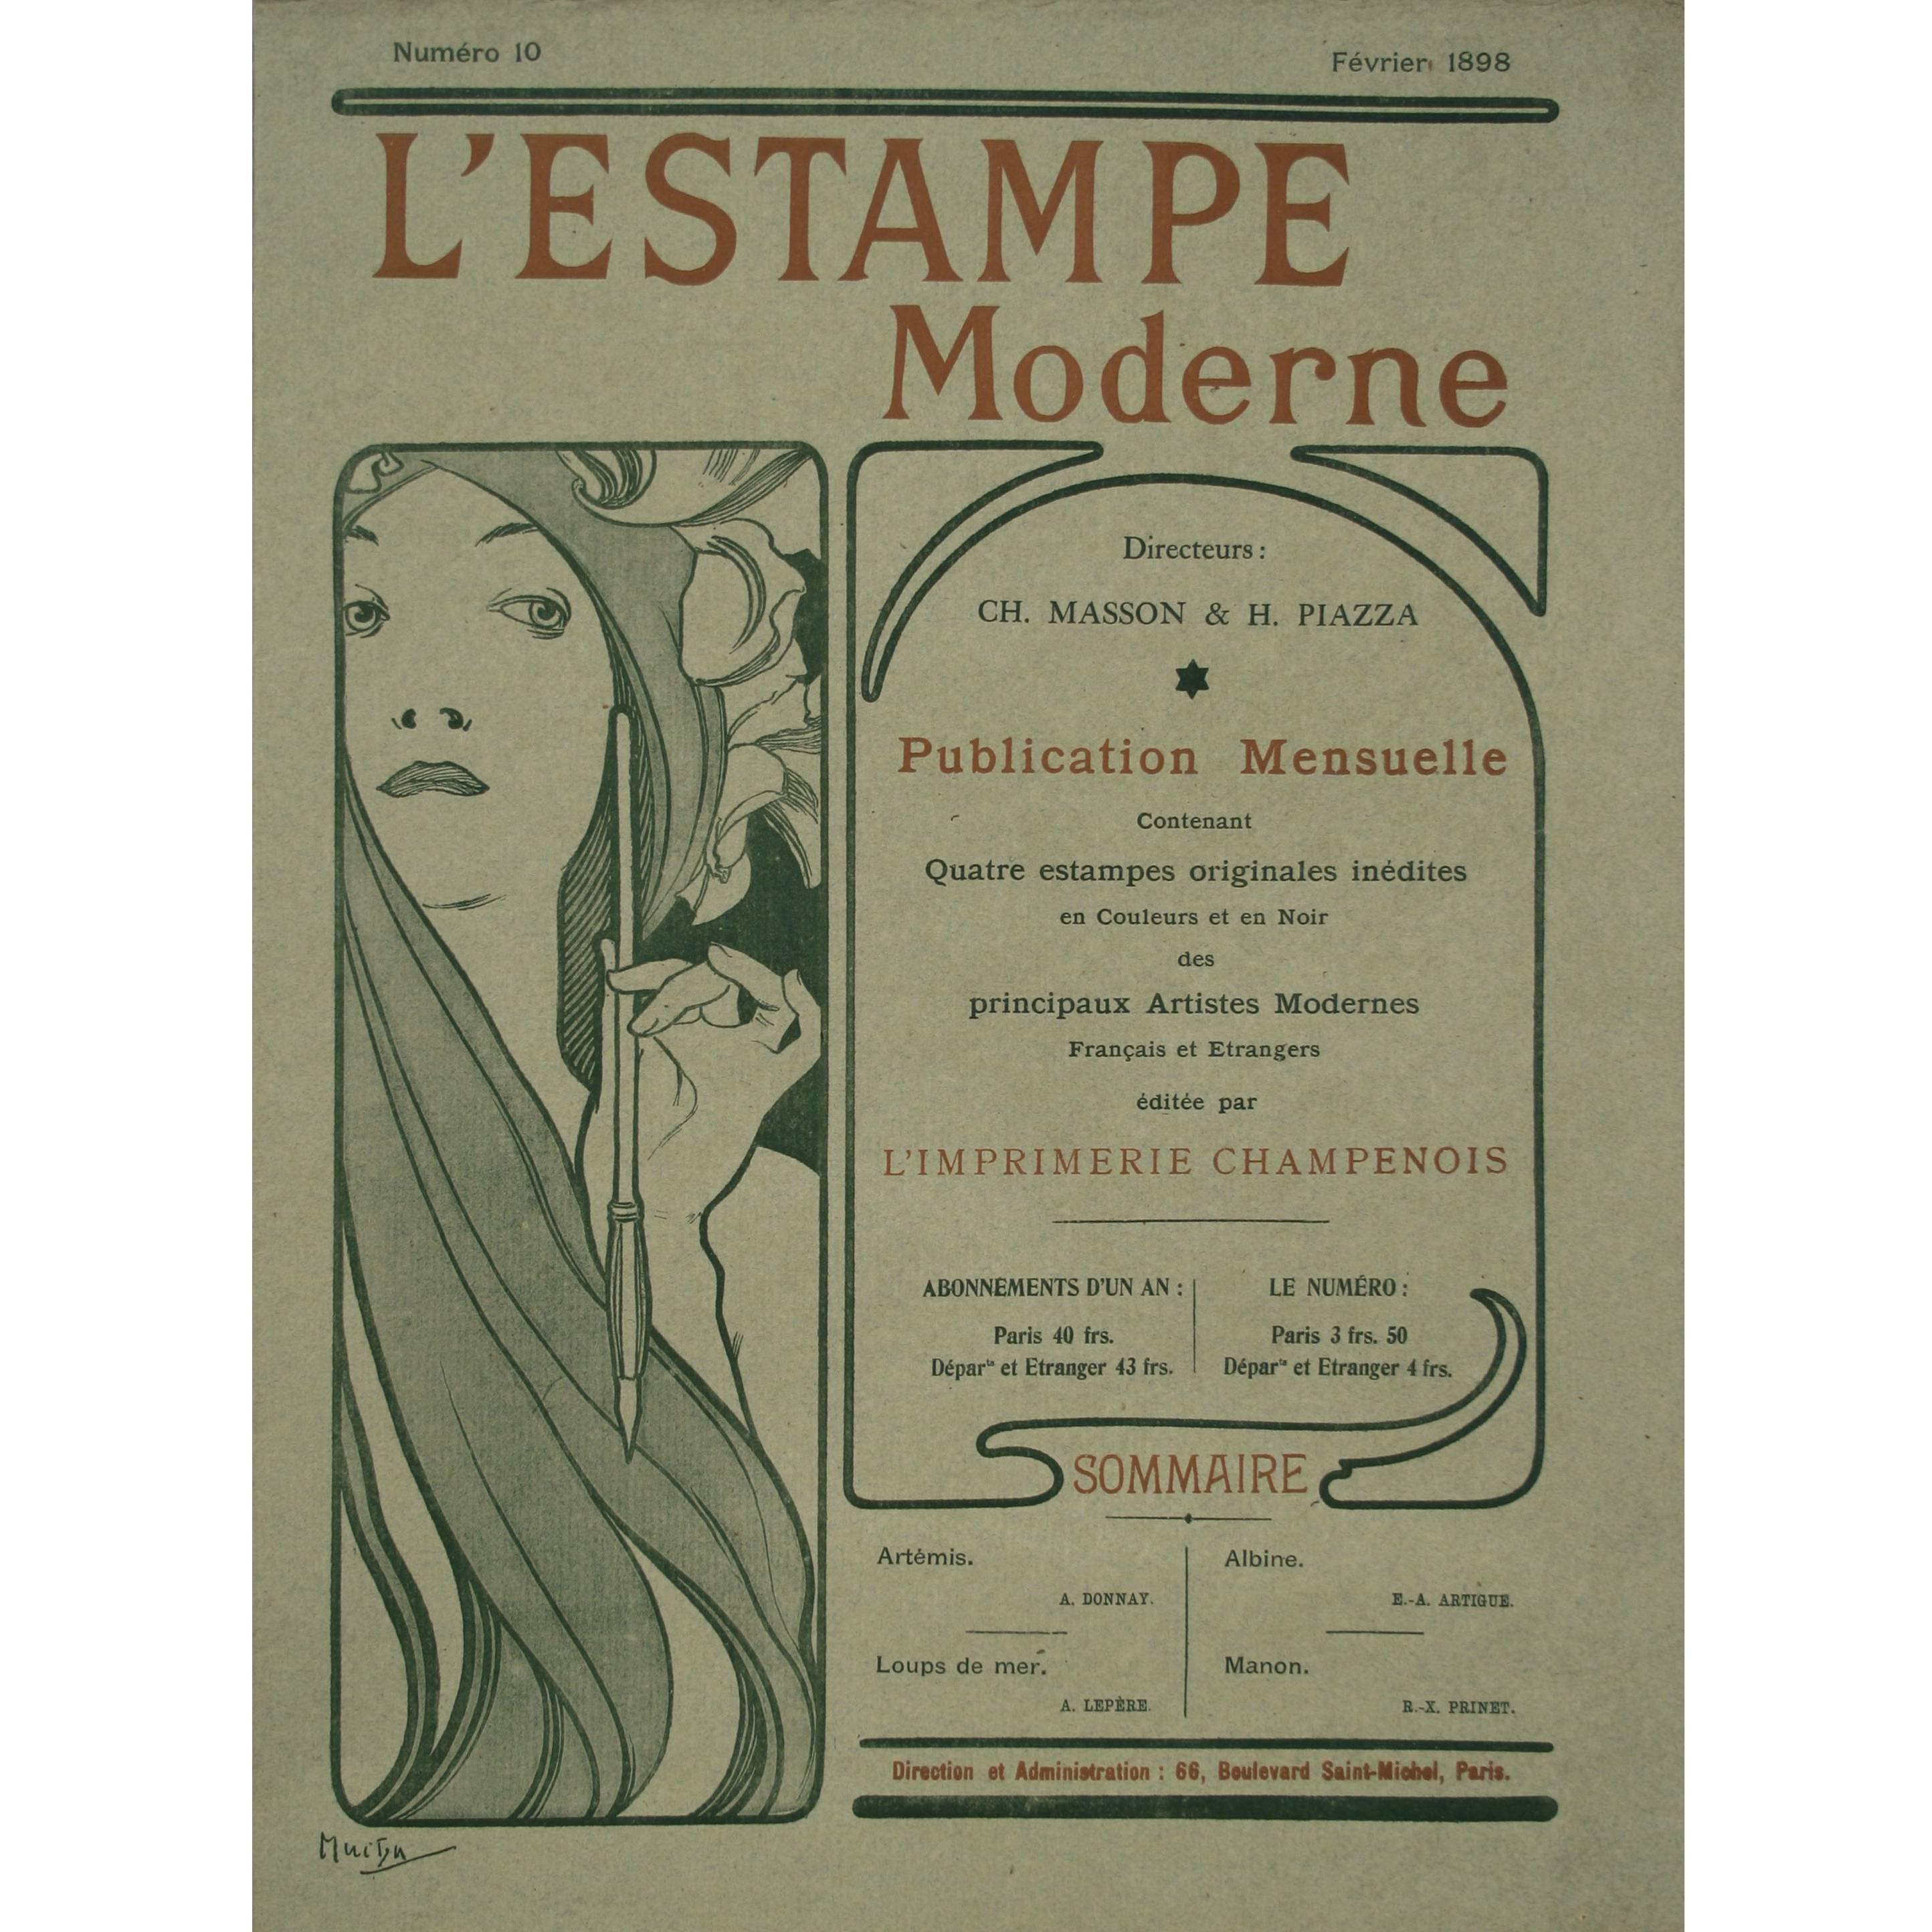 French Art Nouveau Period Folio Cover by Alphonse Mucha, 1898